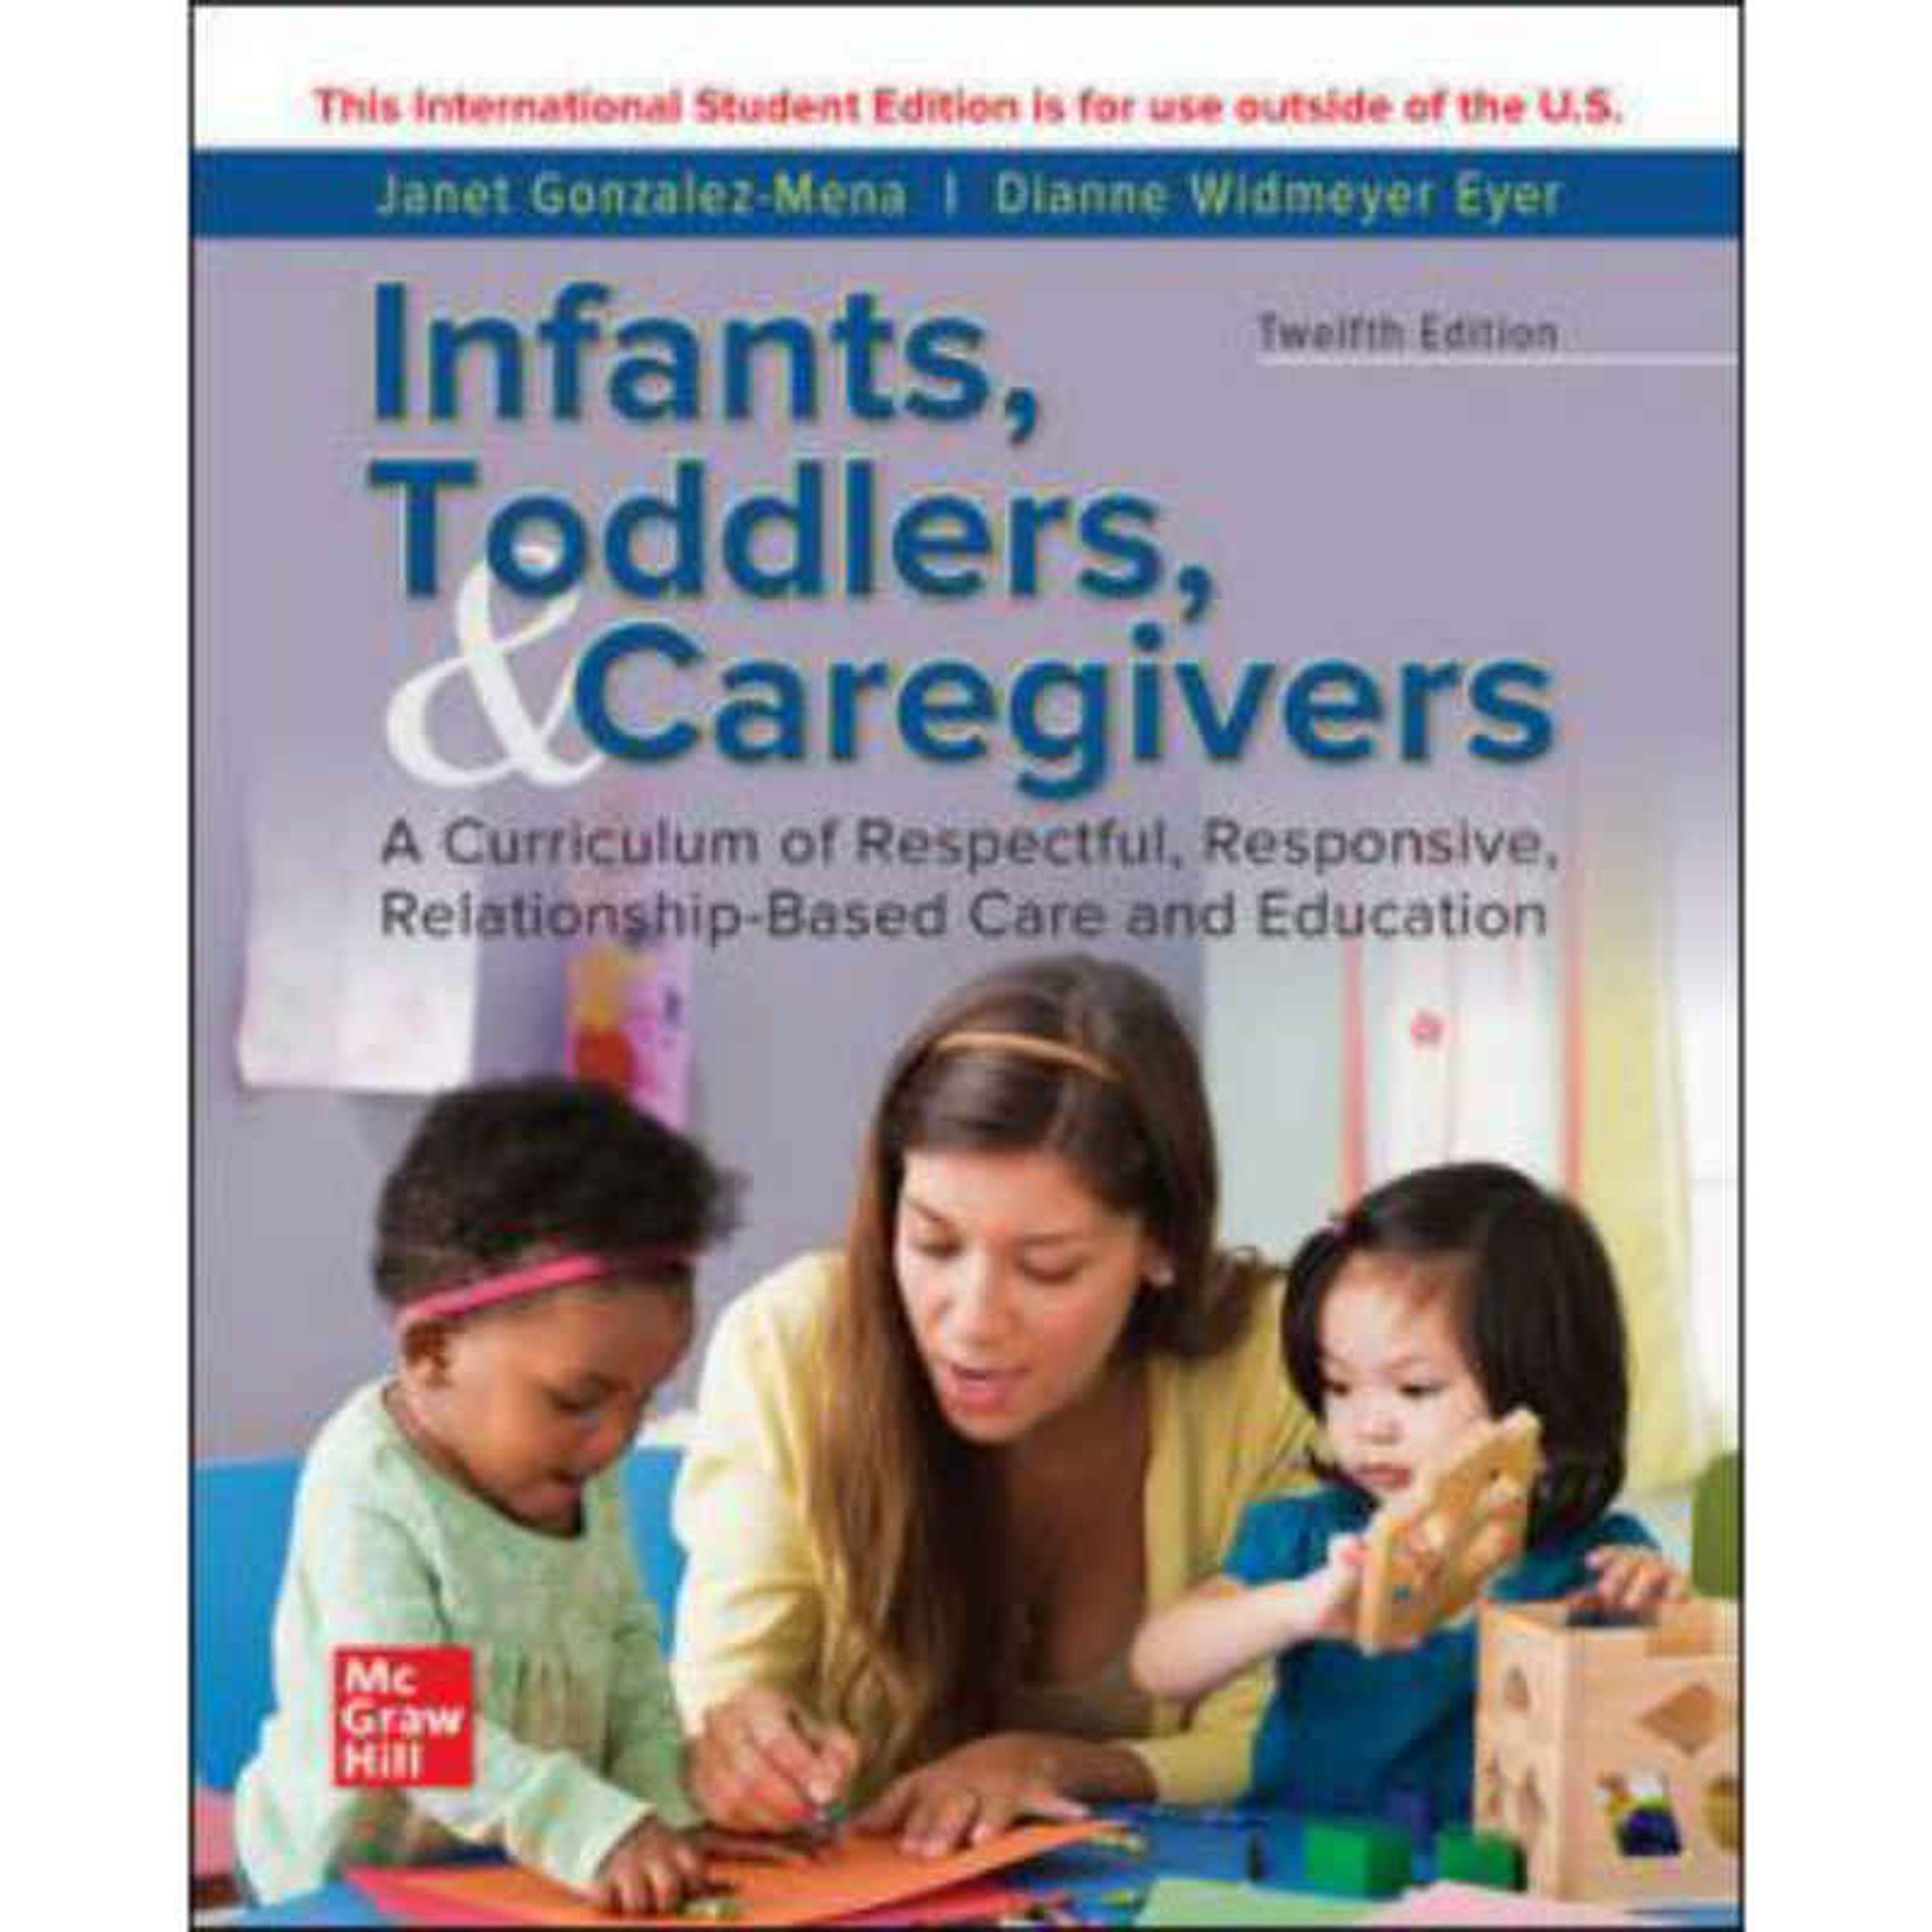 Infants, Toddlers, and Caregivers: A Curriculum of Respectful